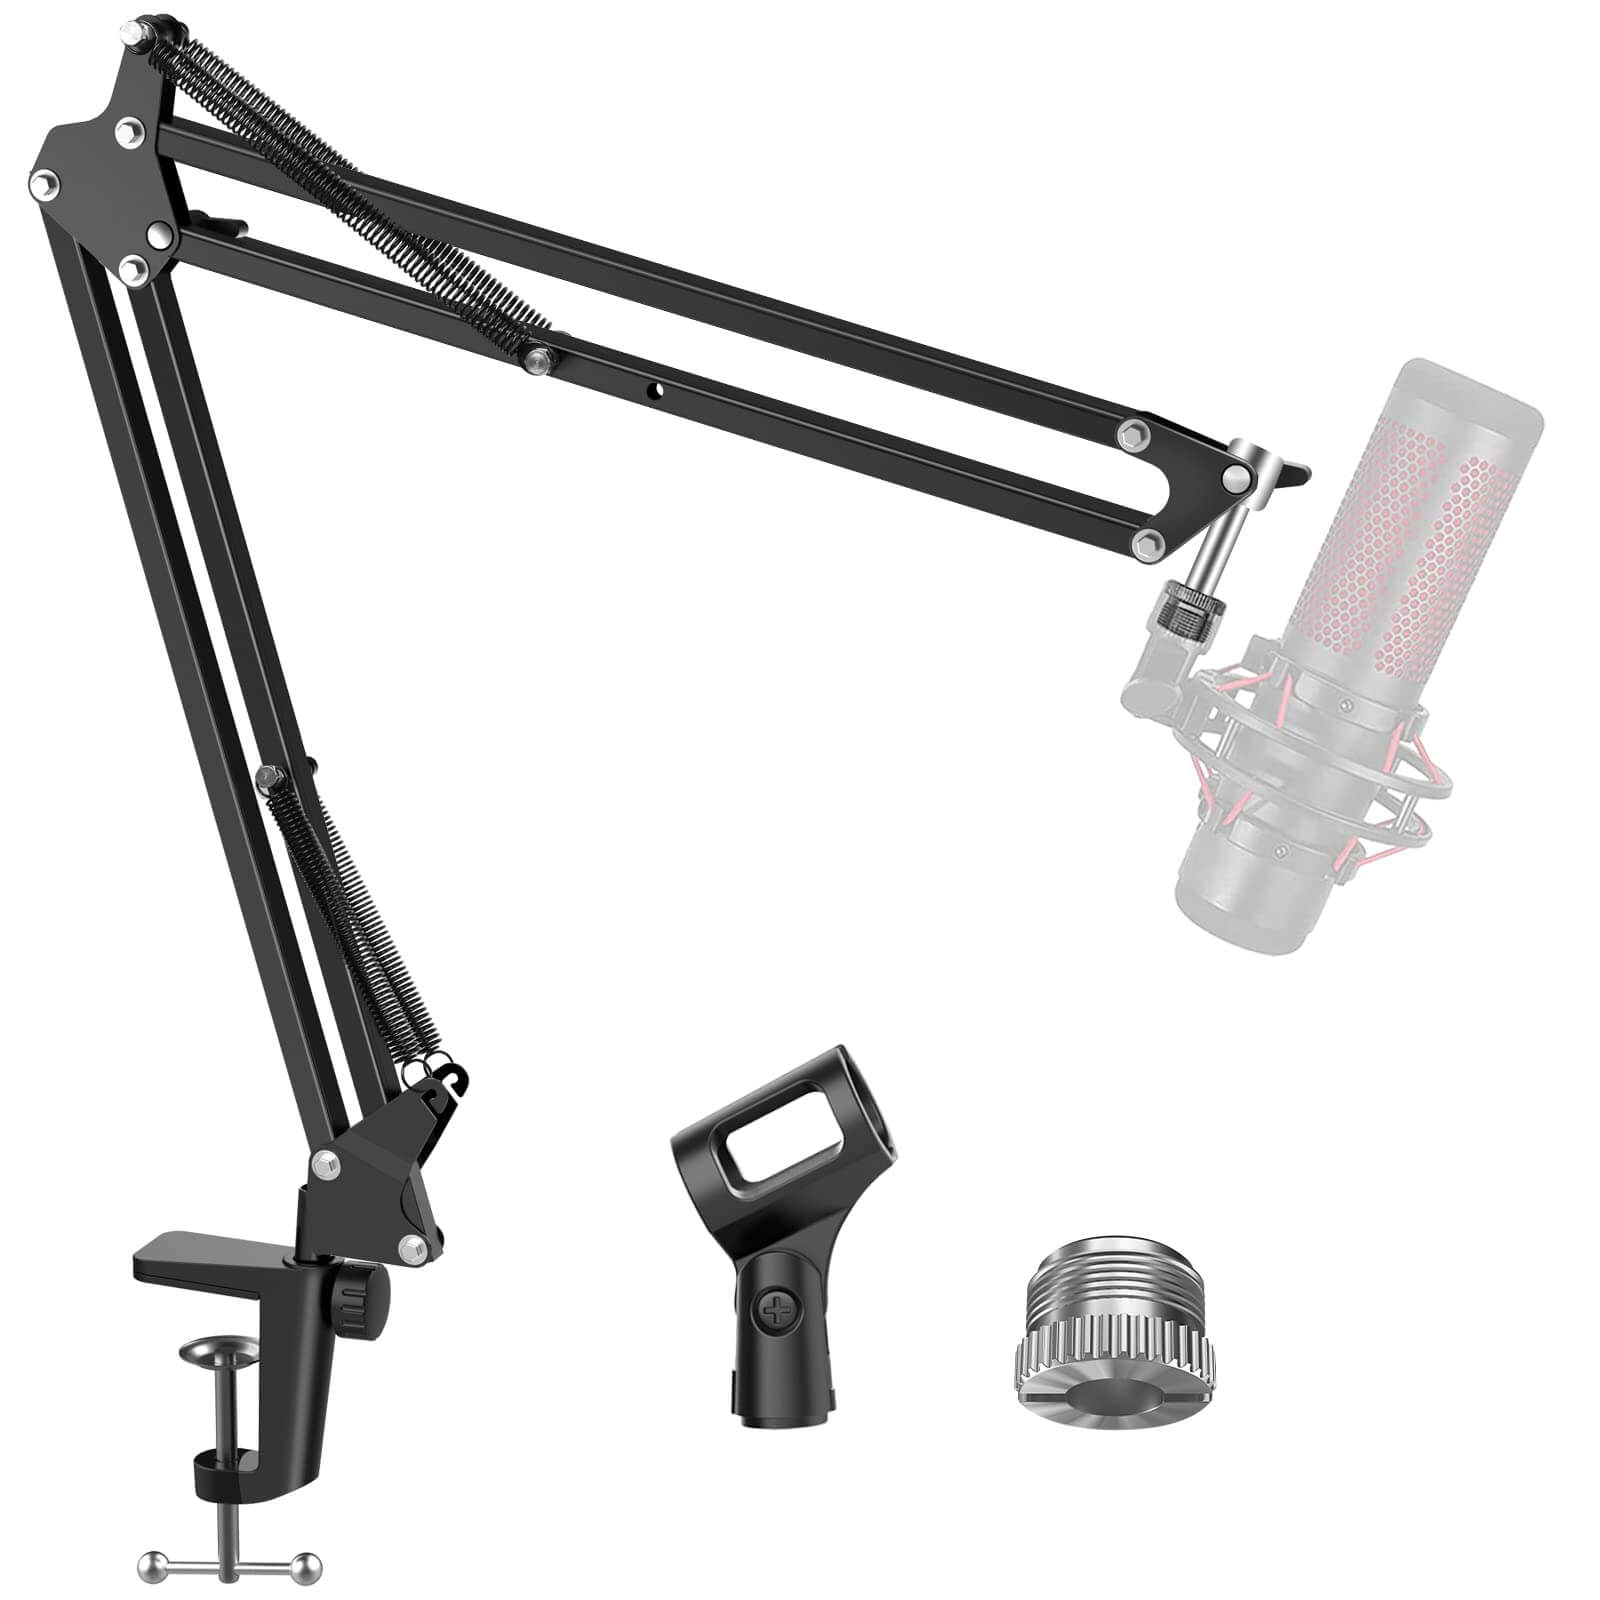 InnoGear Professional Adjustable Microphone Stand Mic Arm Stand Studio